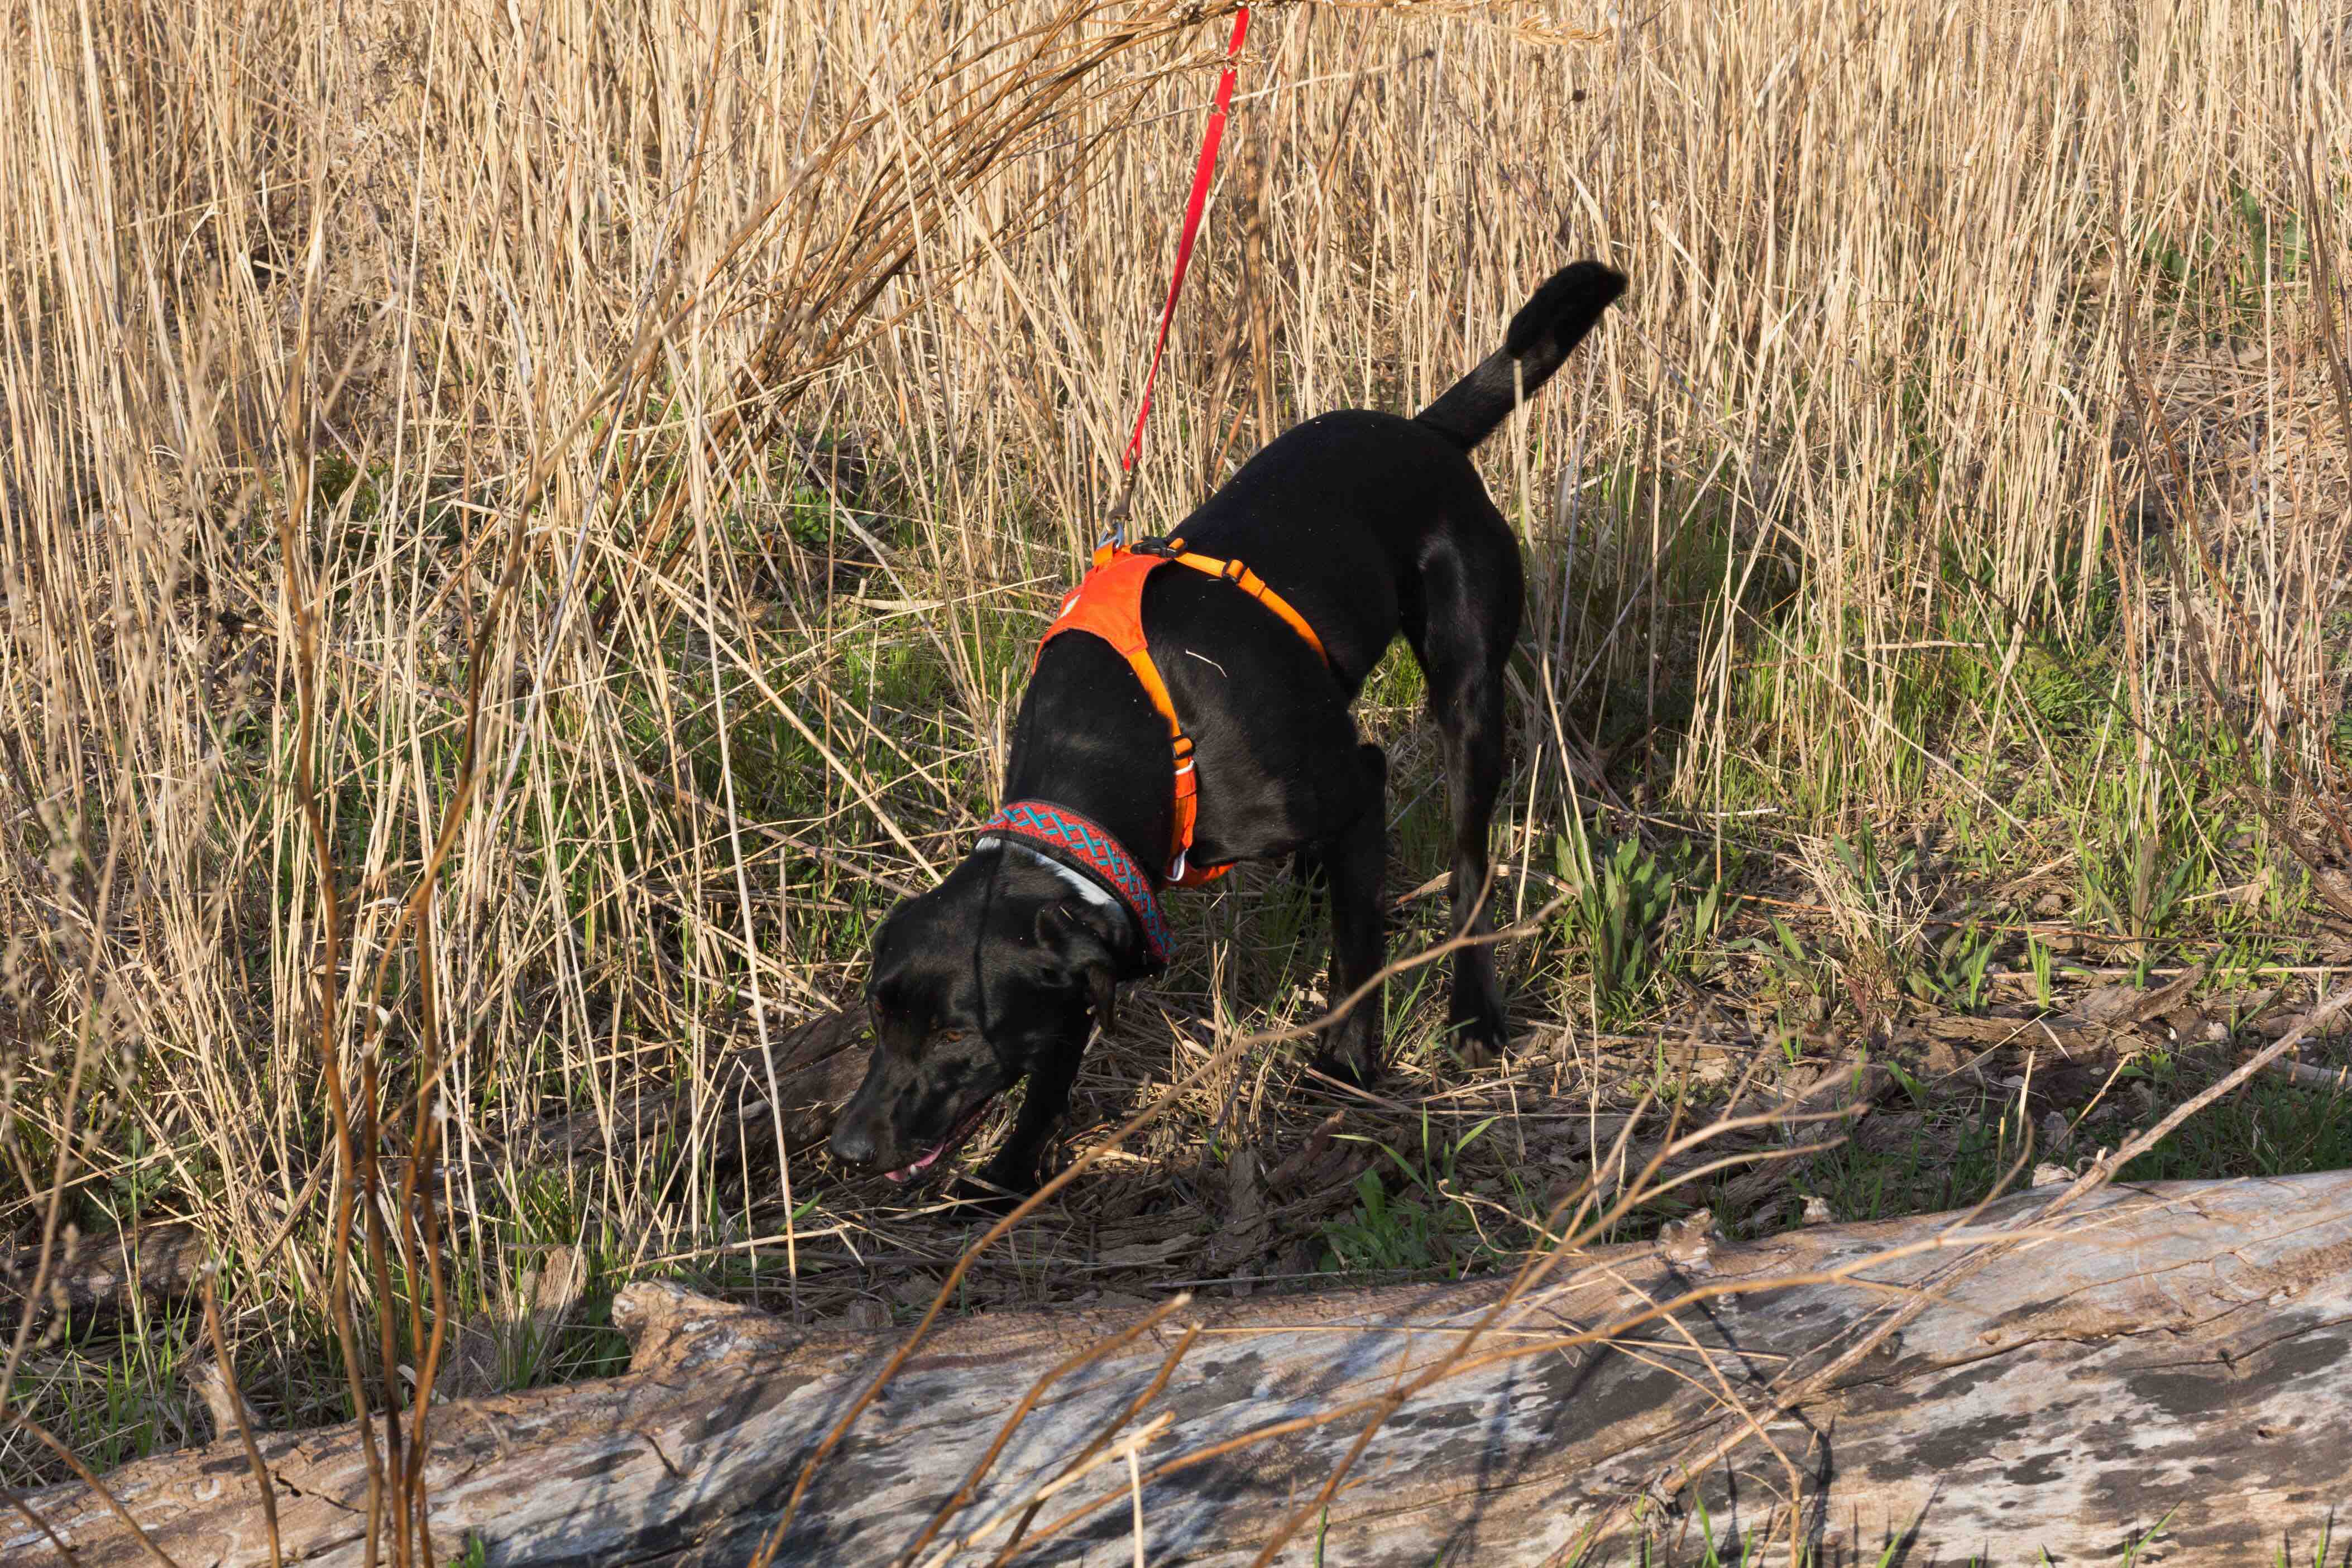 Holder’s dogs work in CDC’s Pollinator Program, in which dogs like Betty White and Ernie locate bumblebee nests, frass (a fine powdery refuse from perforated wood created by boring insects) and other pollinator targets. Credit CDC